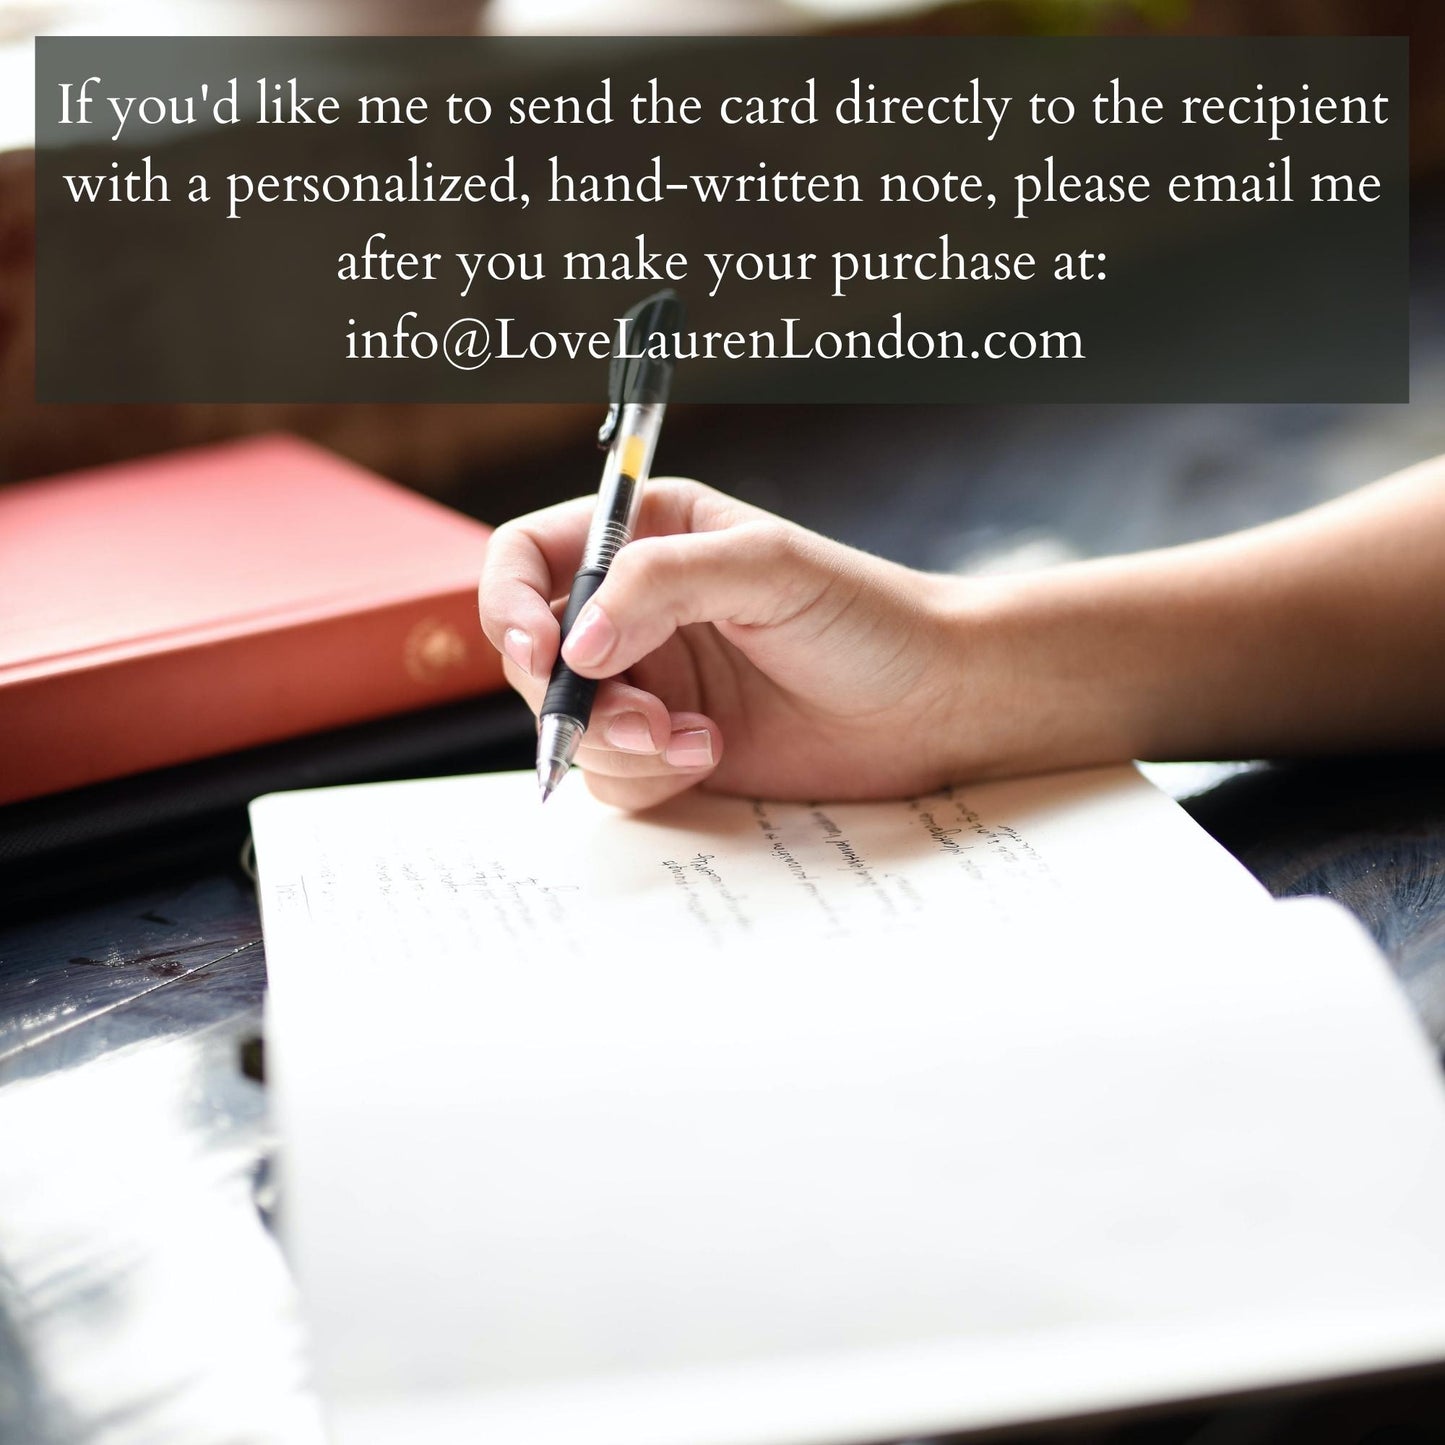 explanation that I will hand-write your card and mail it to the recipient - for no additional charge